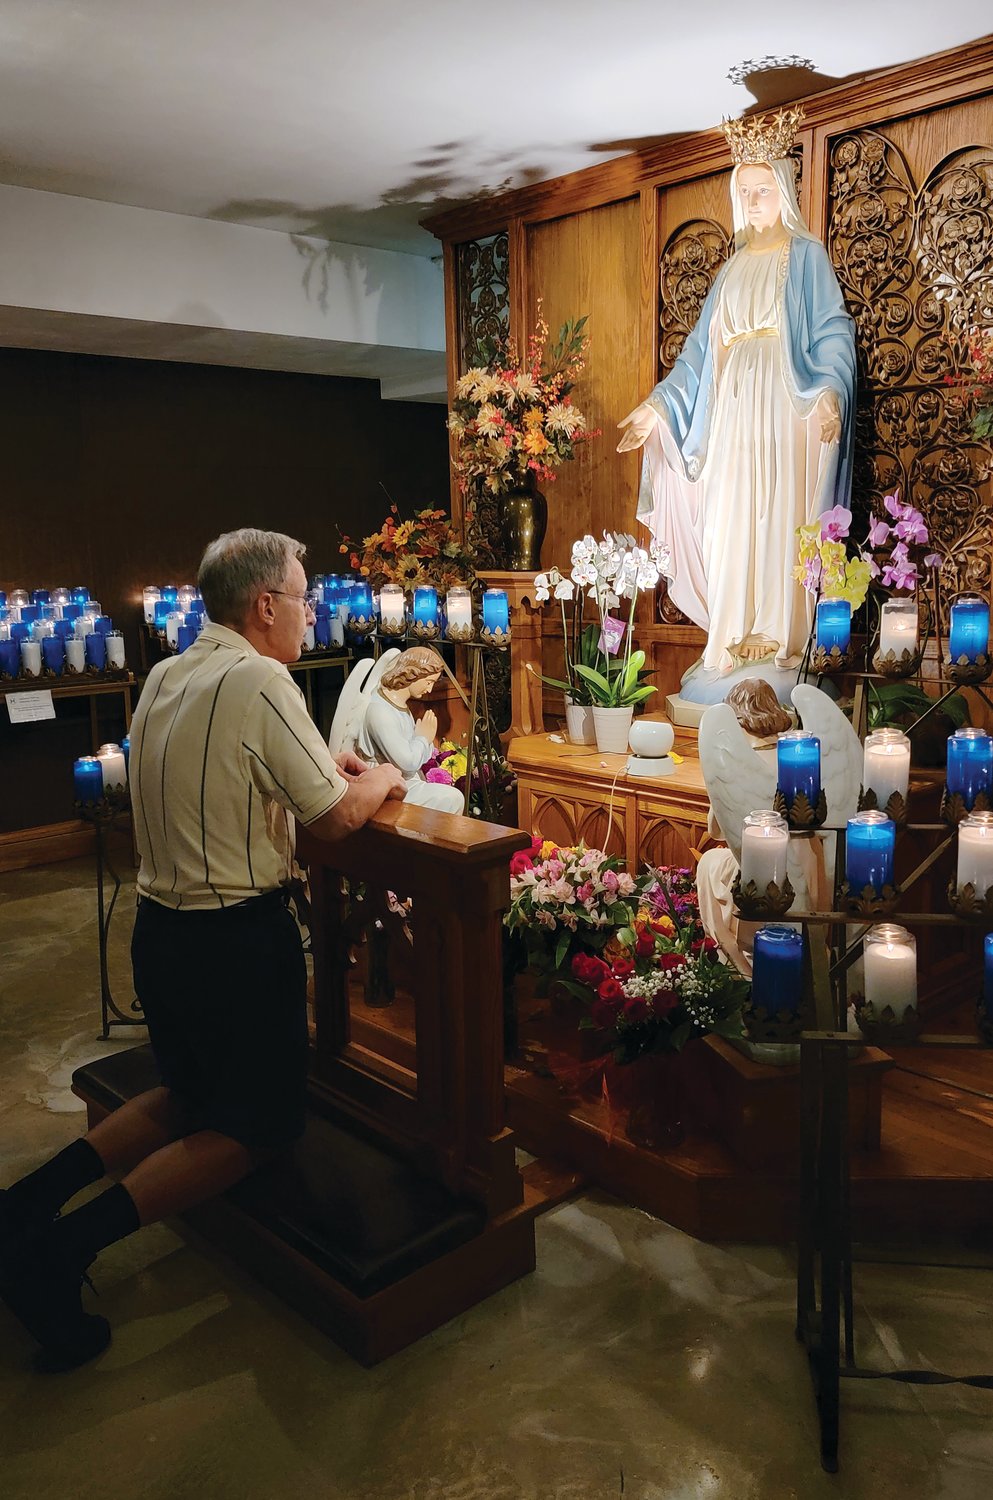 Father Suriani takes a moment to pray in front of the Blessed Mother at the National Shrine of Our Lady of Good Help, a Marian shrine, located within the Roman Catholic Diocese of Green Bay.